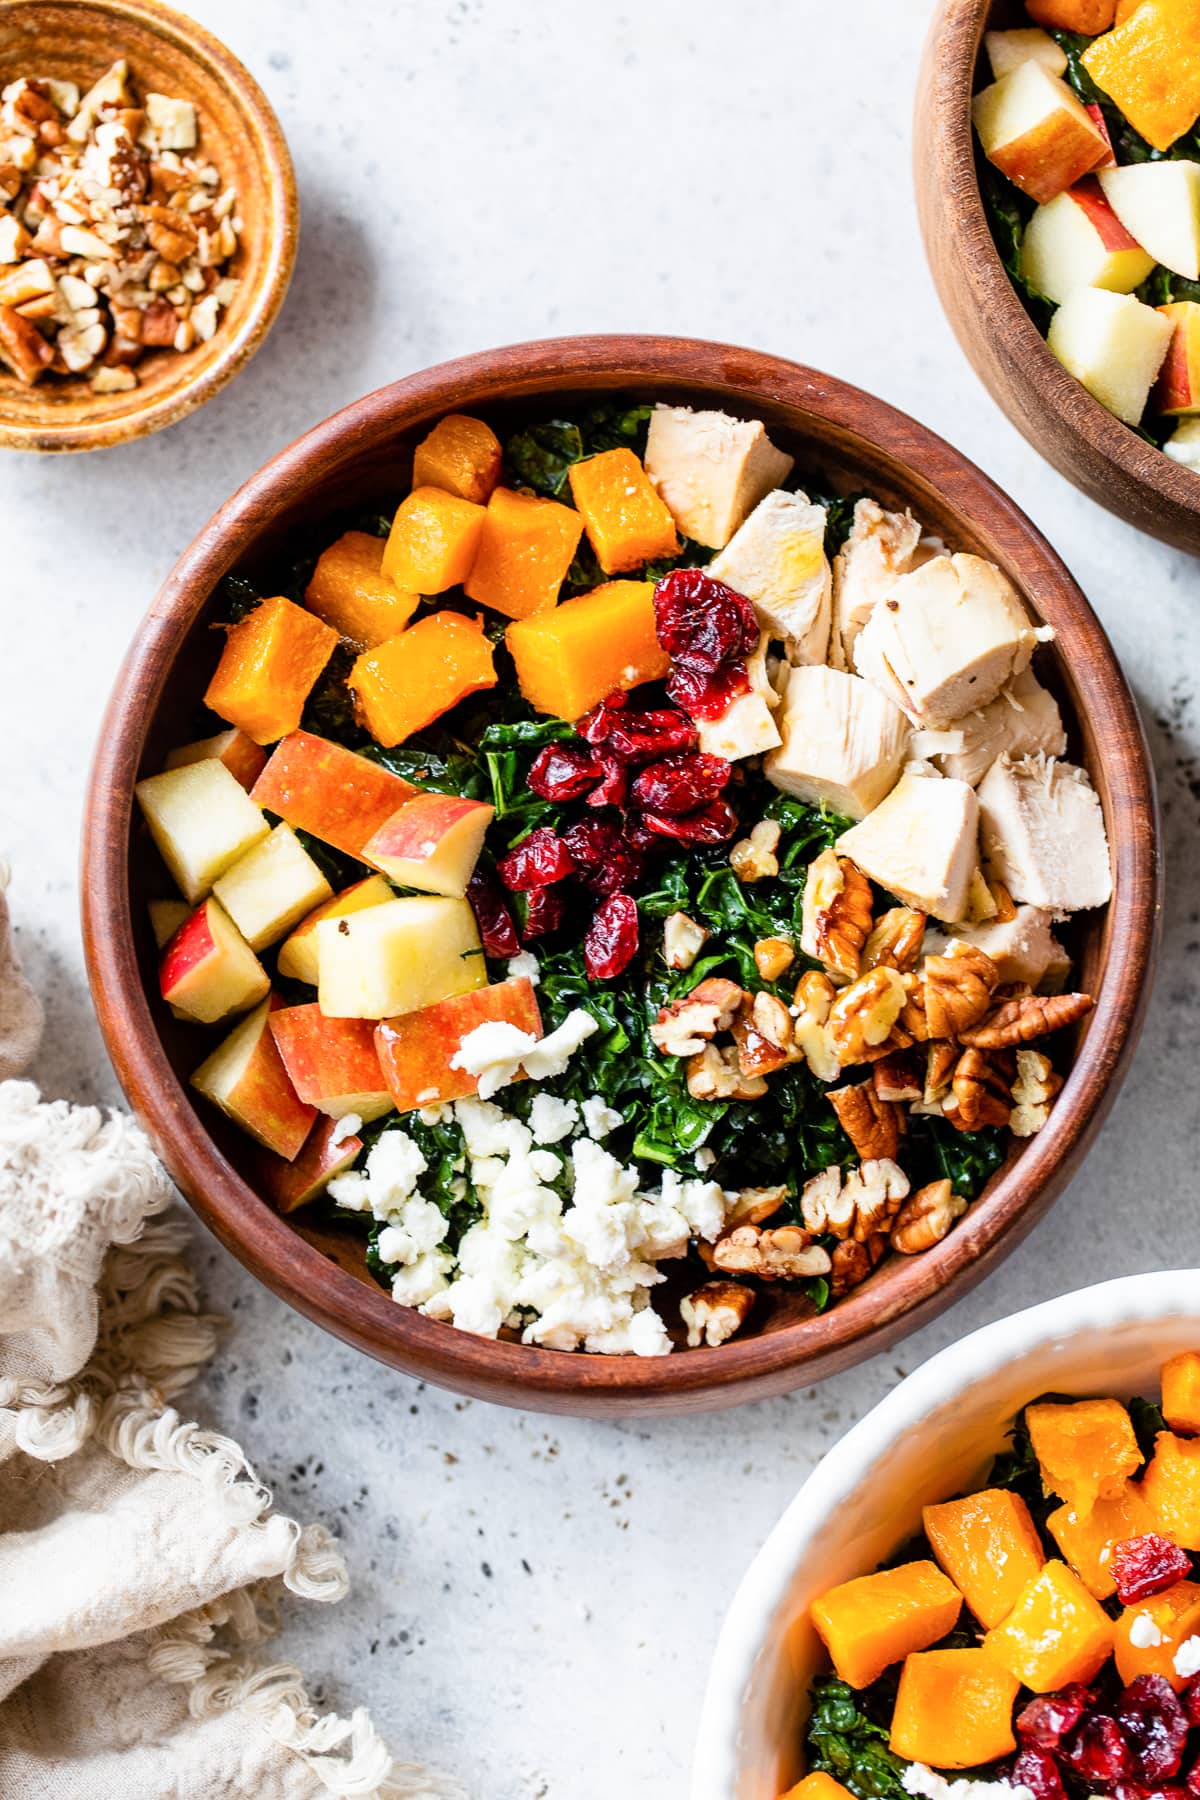 Kale Salad with Butternut Squash and Chicken